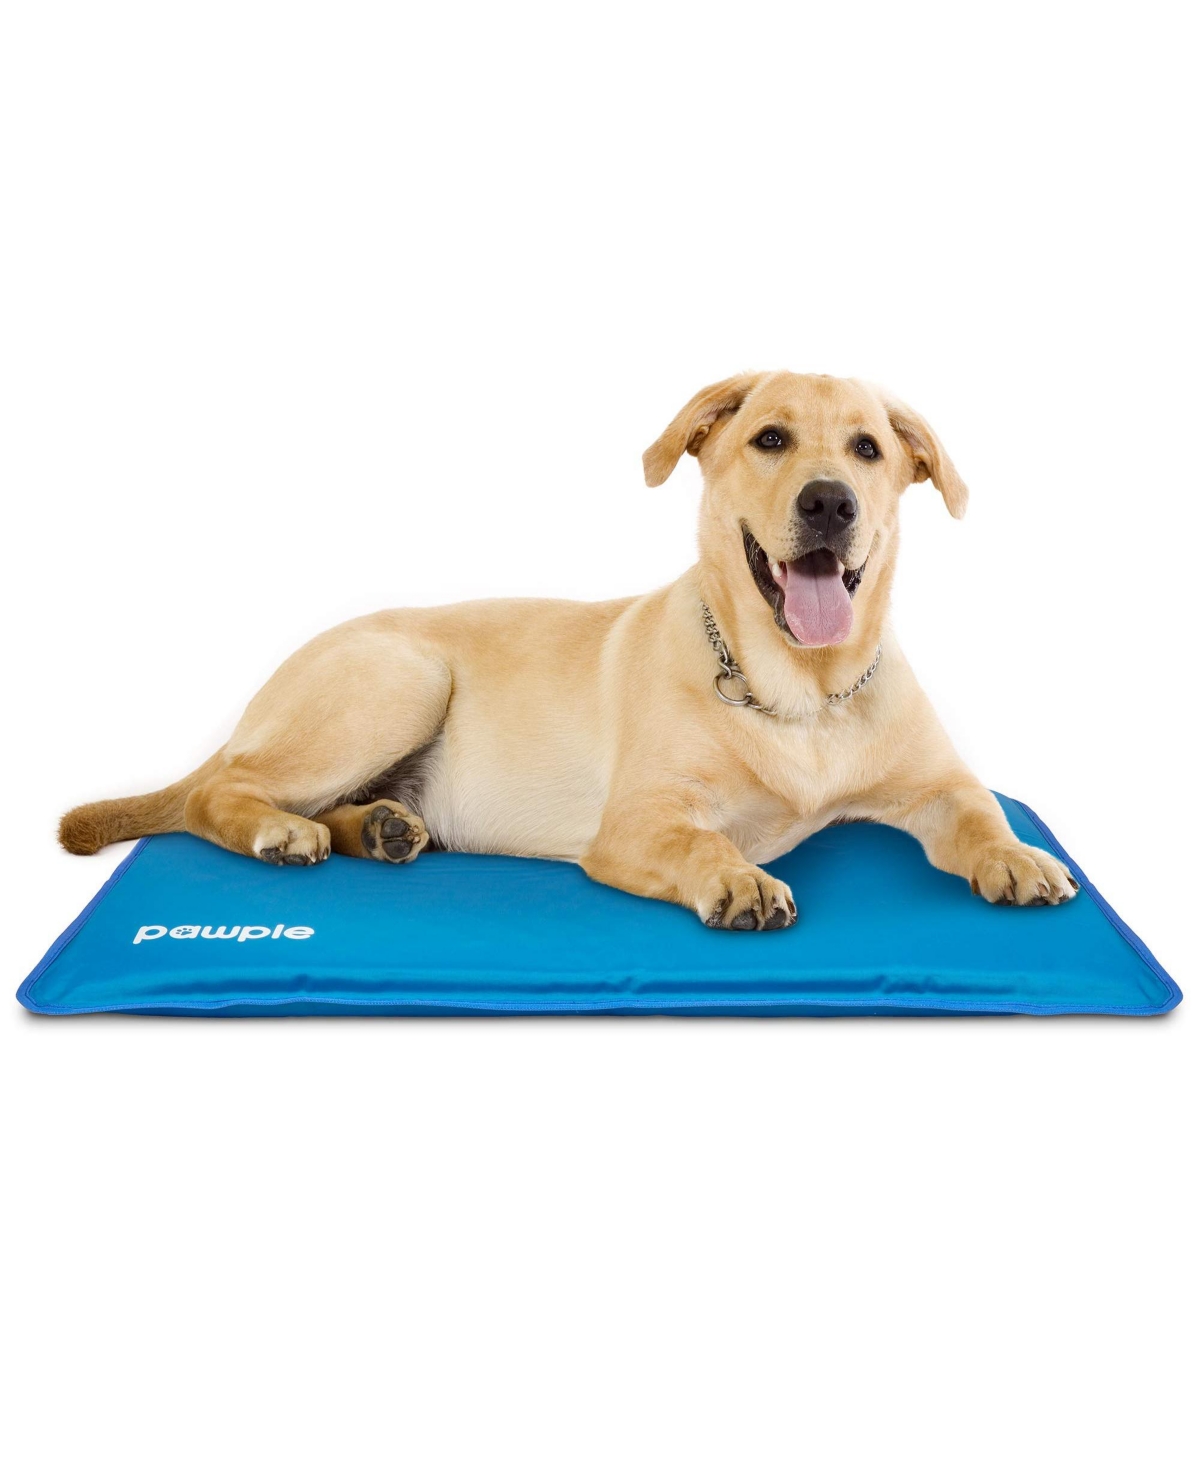 Self Cooling Pet Bed, Dog Mat for Crates and Beds - Large - Blue